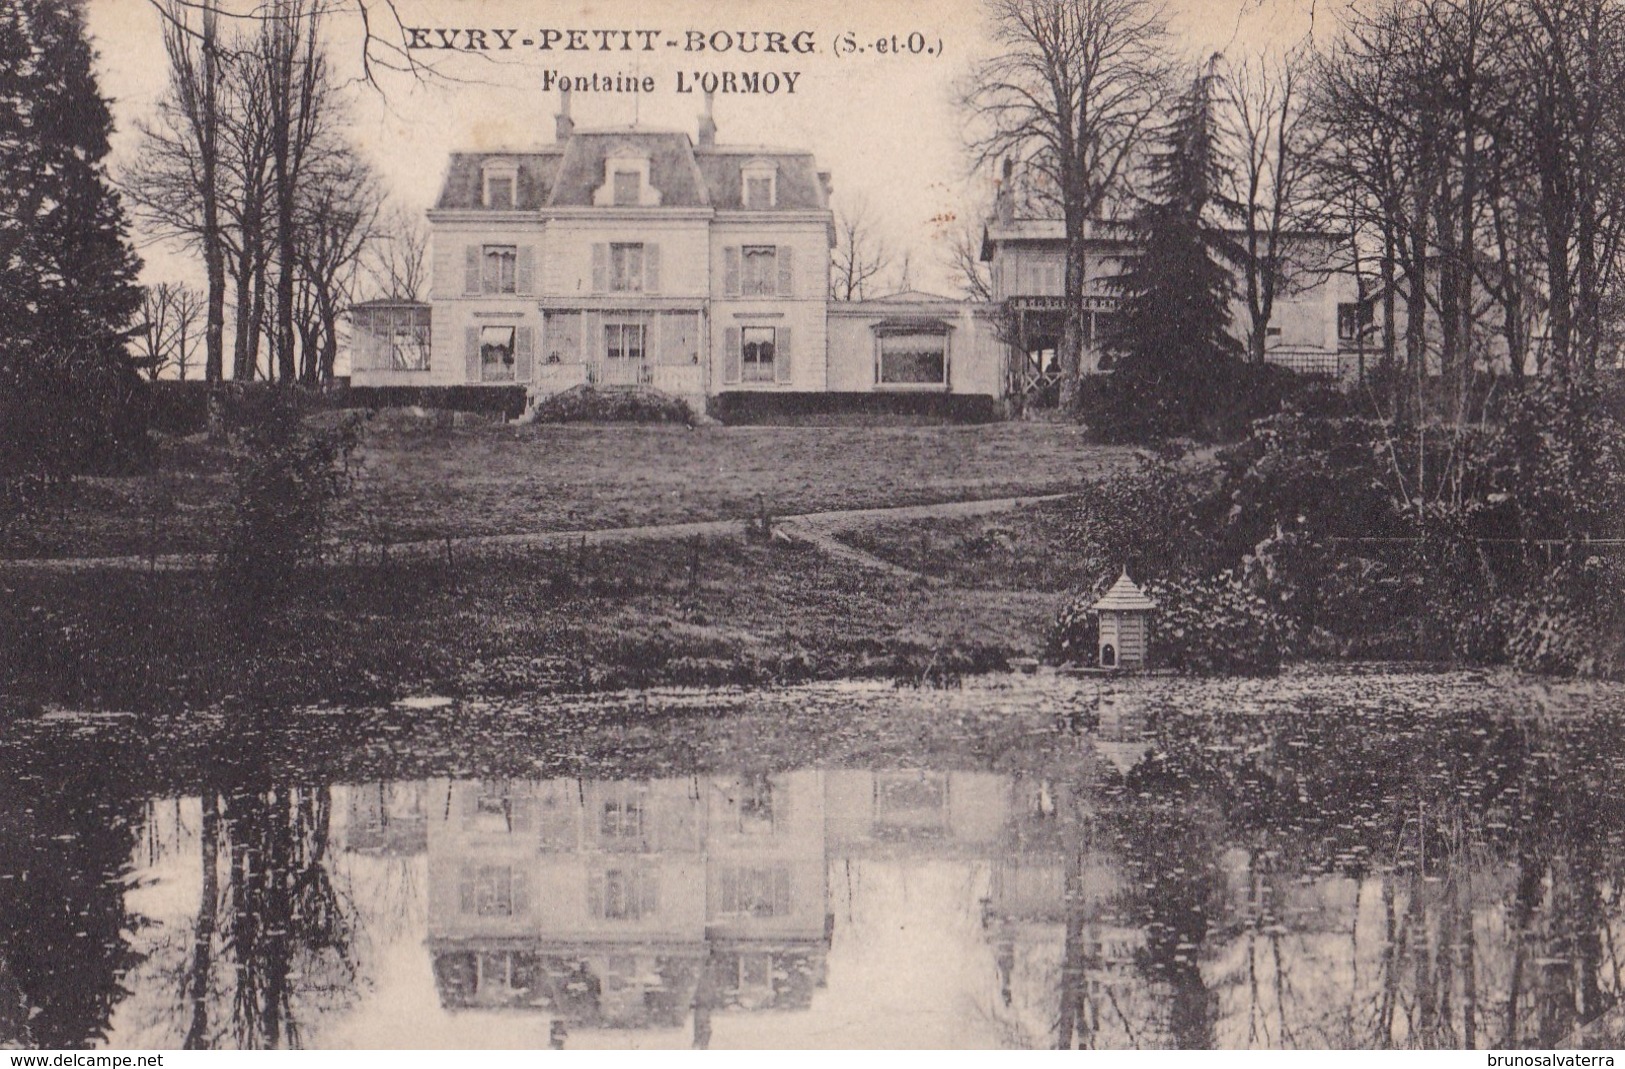 EVRY-PETIT-BOURG - Fontaine L'Ormoy - Evry